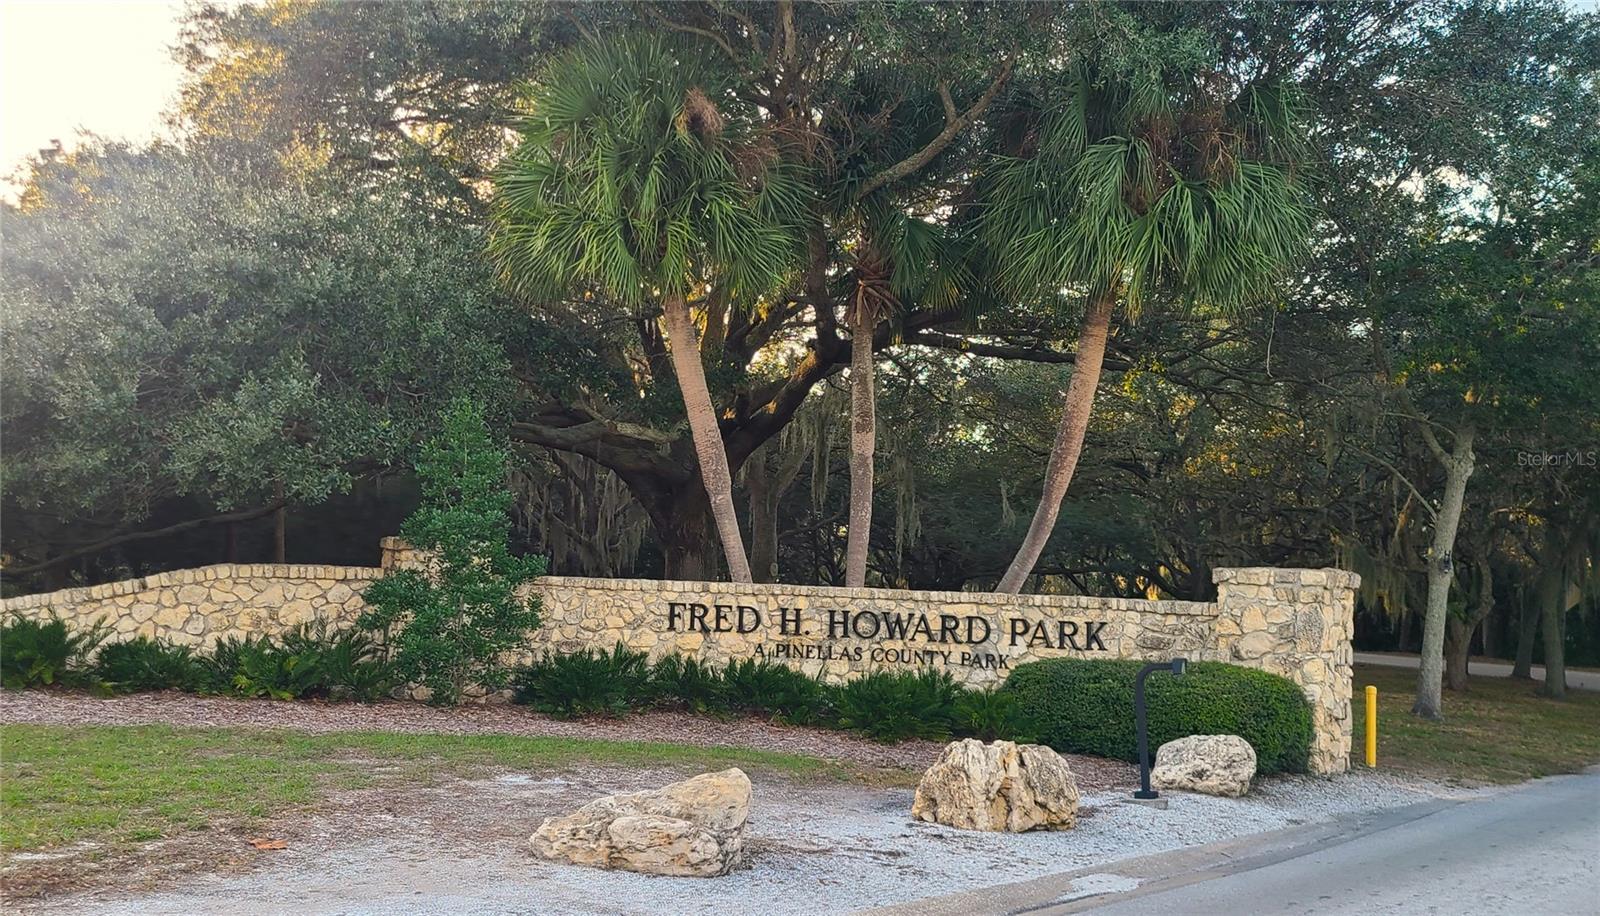 Nearby Fred Howard Park